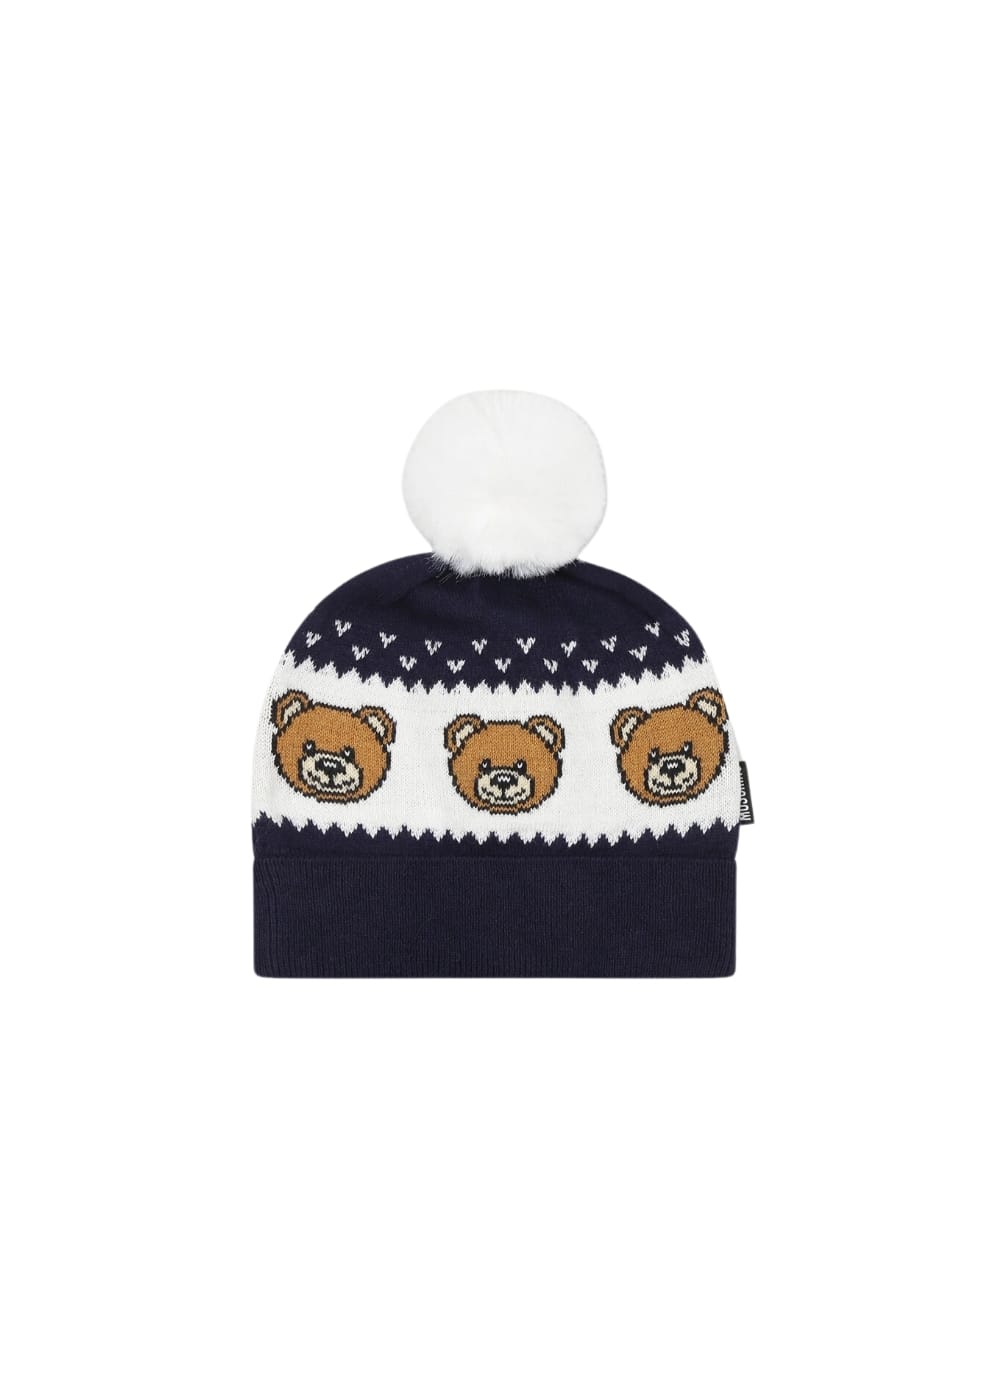 Featured image for “Moschino Cappello Teddy Bear”